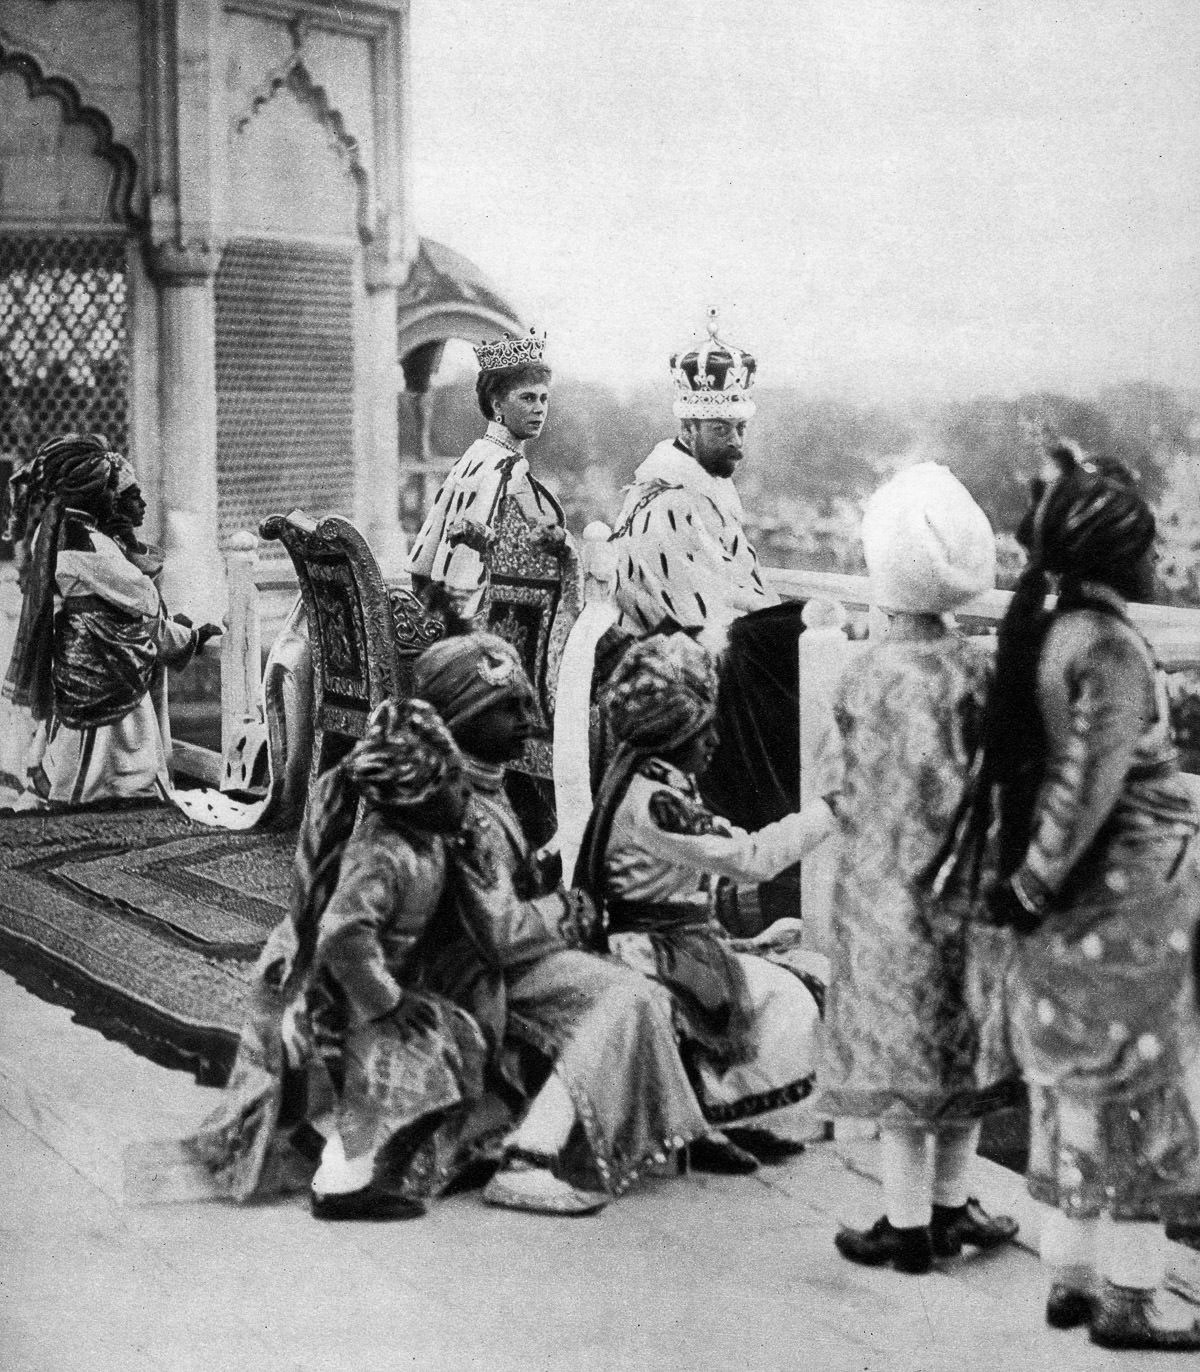 The king and queen attend a ceremony in Delhi.